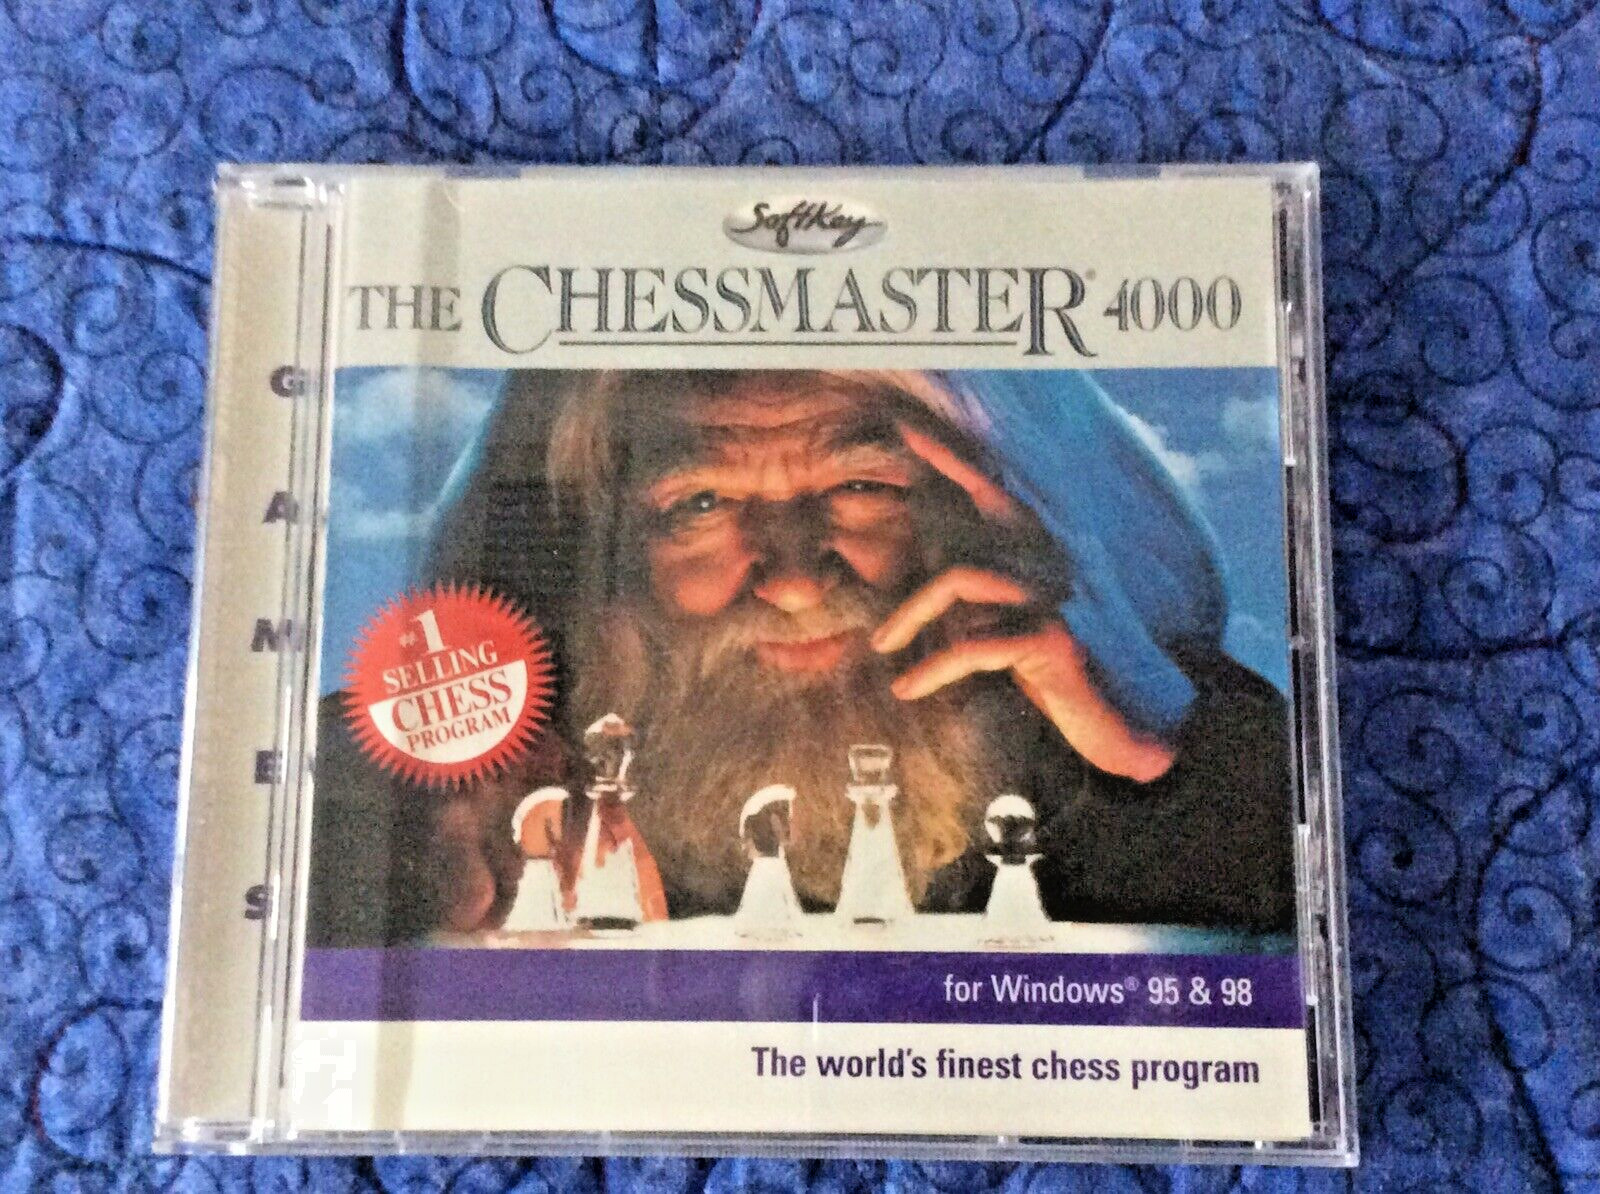 Preowned - “ The Chessmaster 4000” DVD -Windows 95 & 98 -original Papers & Case